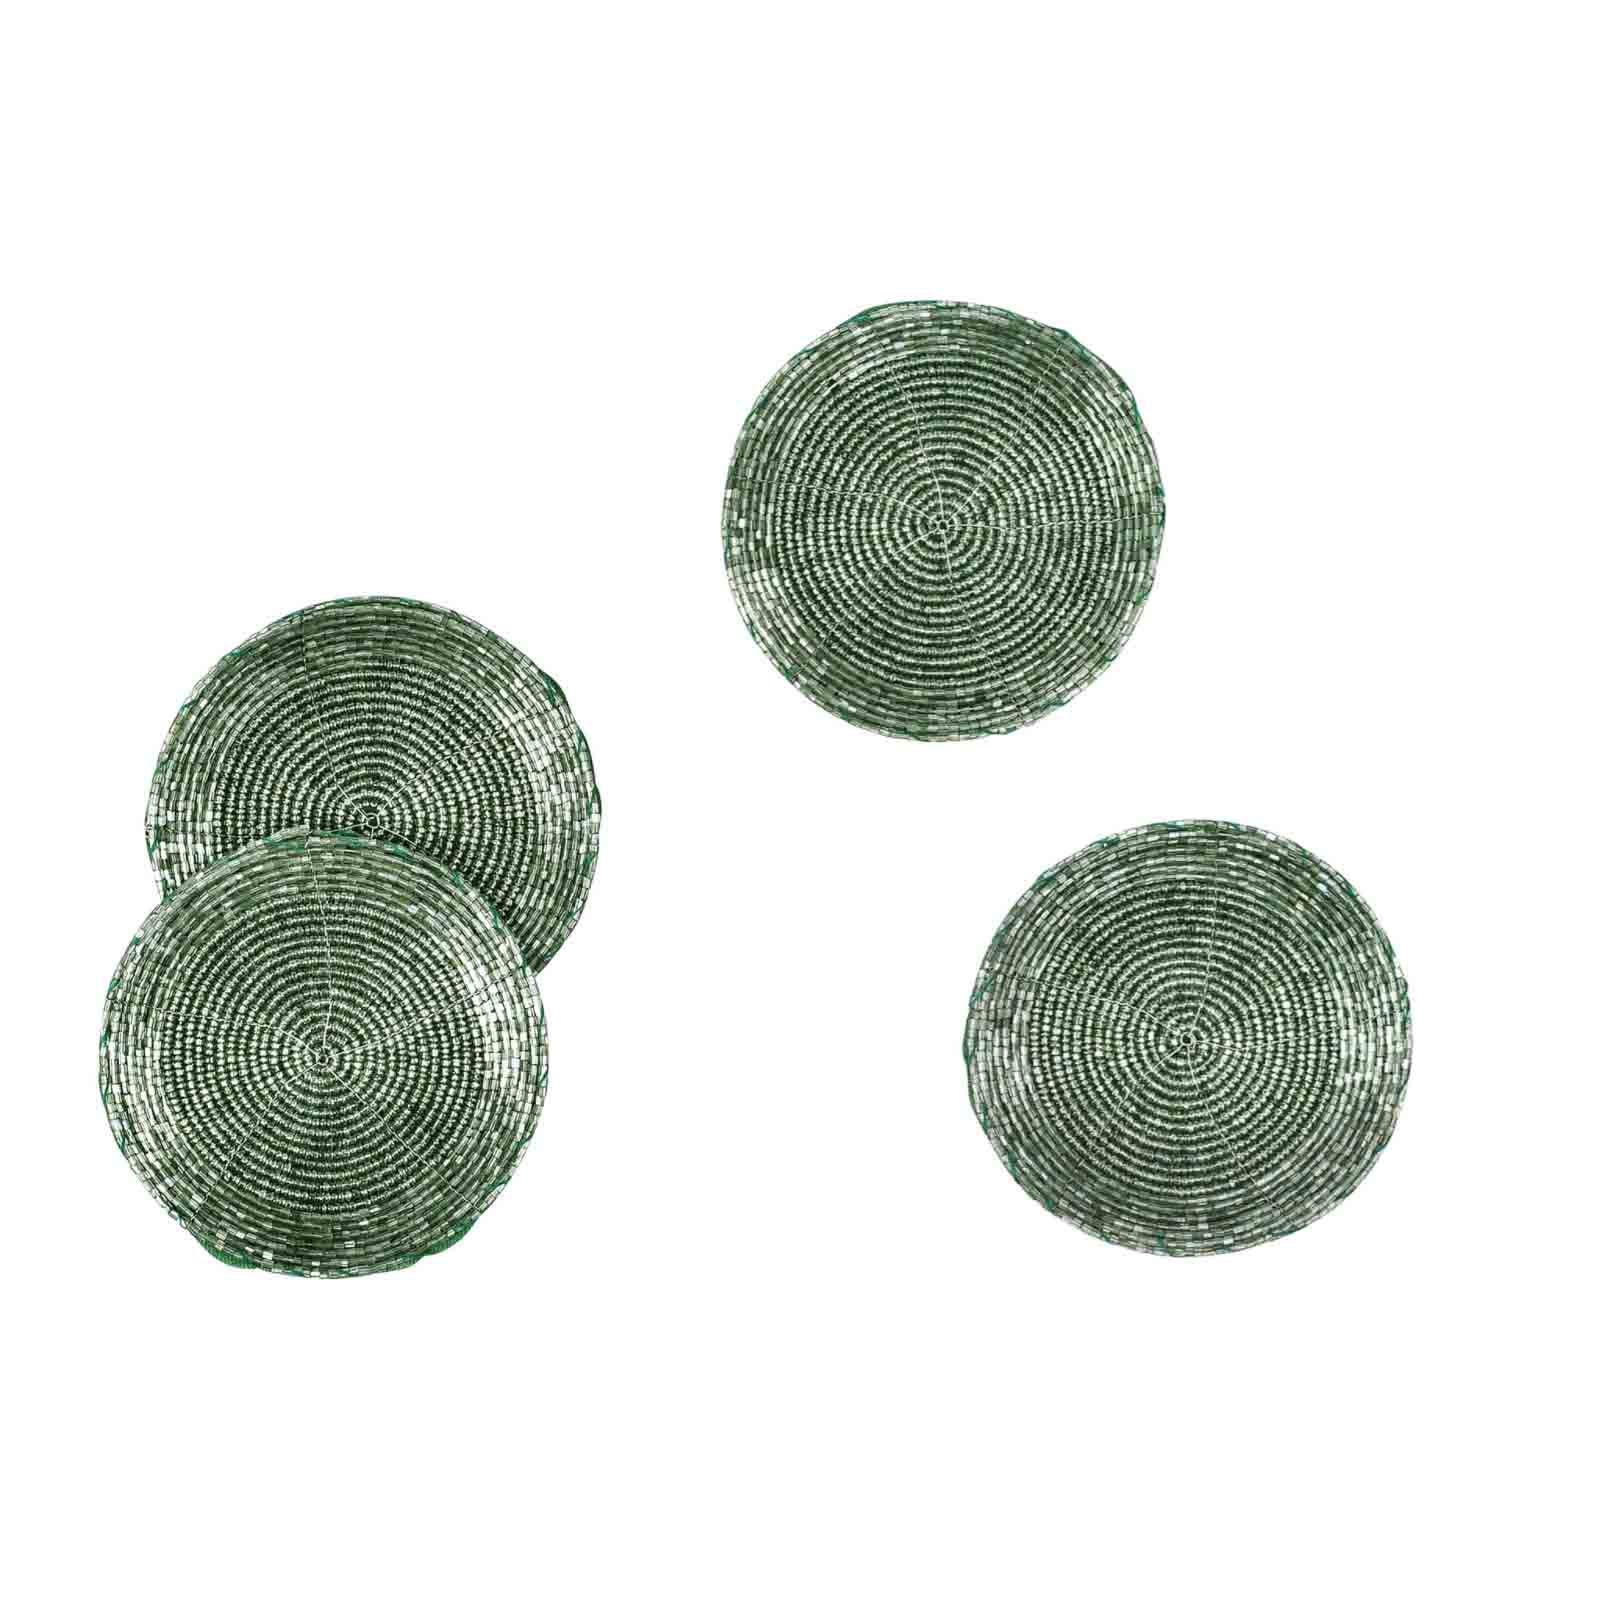 Glass Beaded Coaster in Green, Set of 4